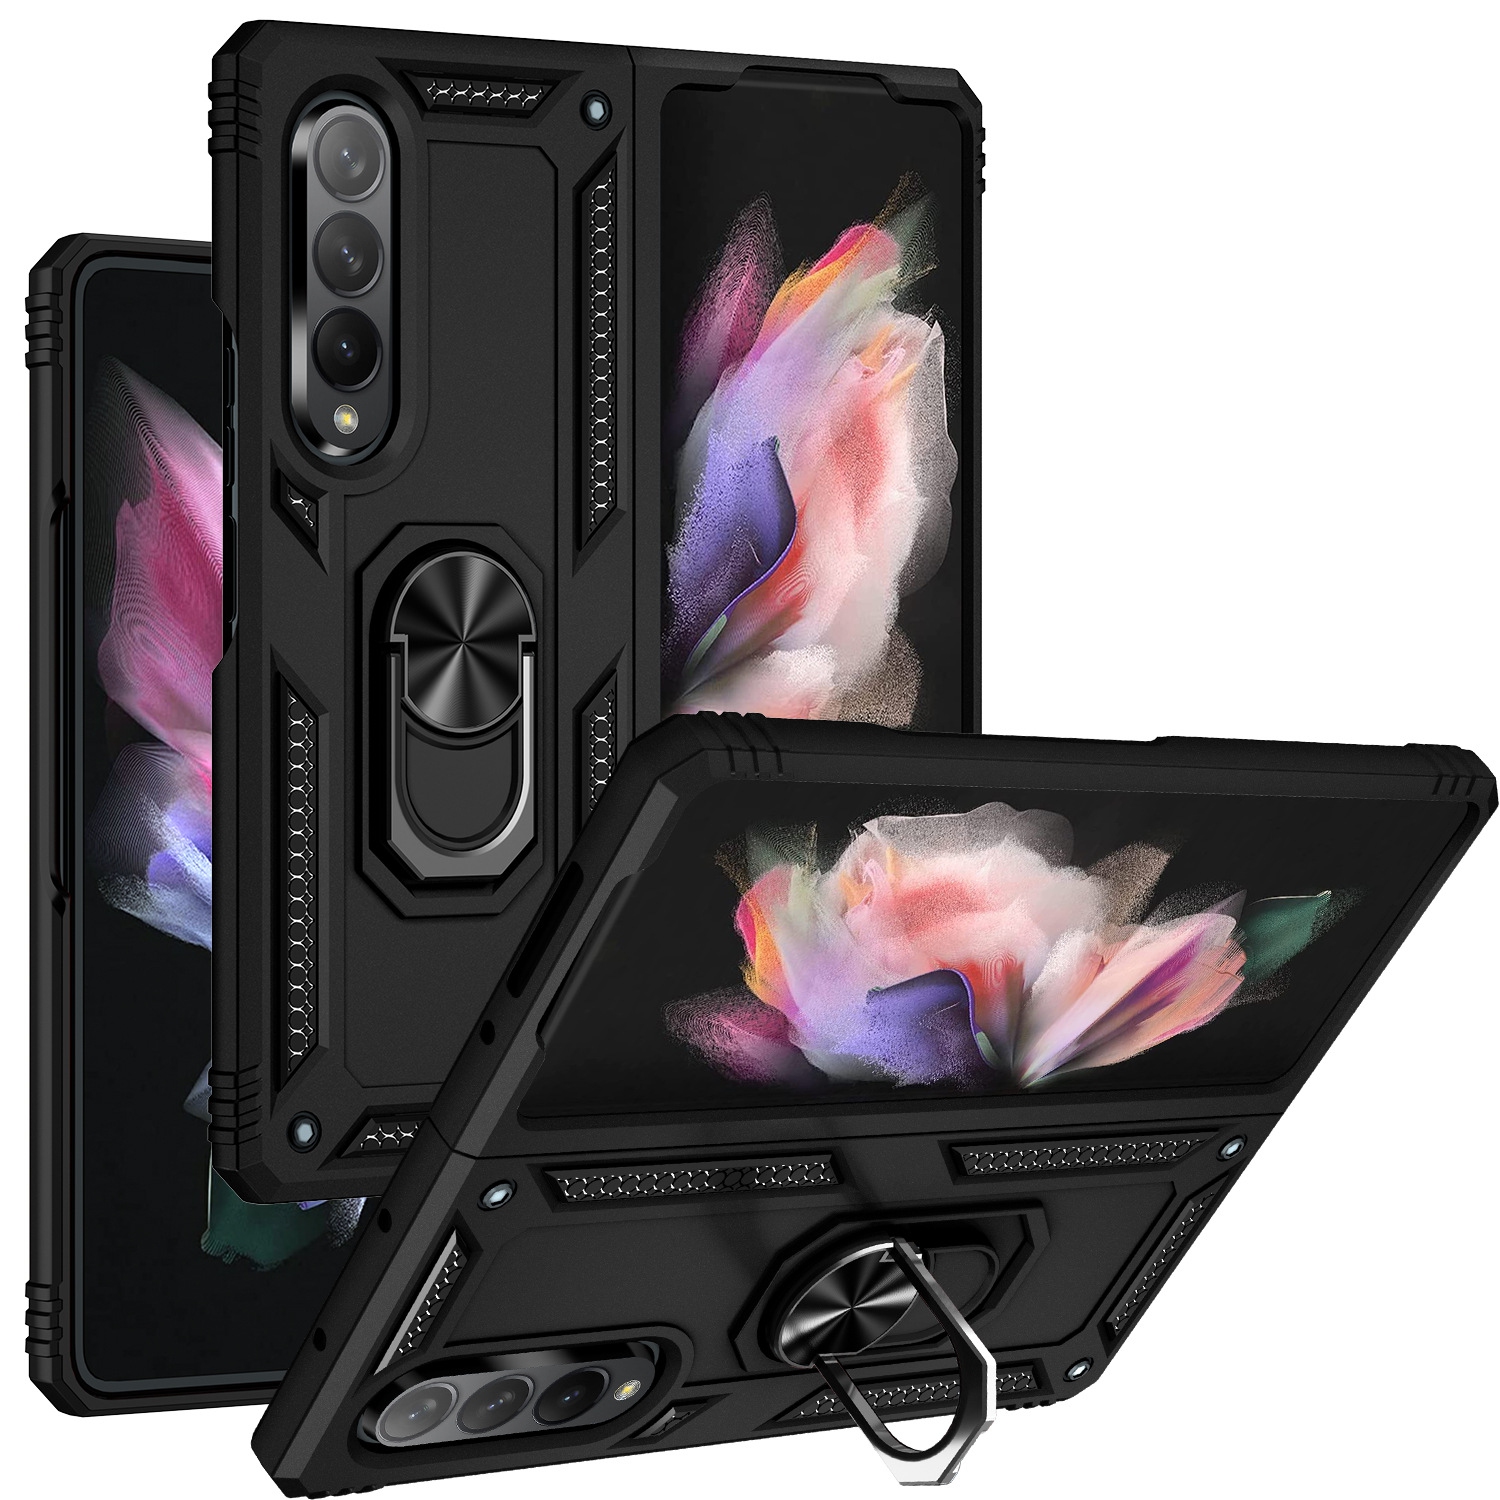 【CSmart】 Anti-Drop Hybrid Magnetic Hard Armor Case with Ring Holder for Samsung Galaxy Z Fold 3 5G, Black